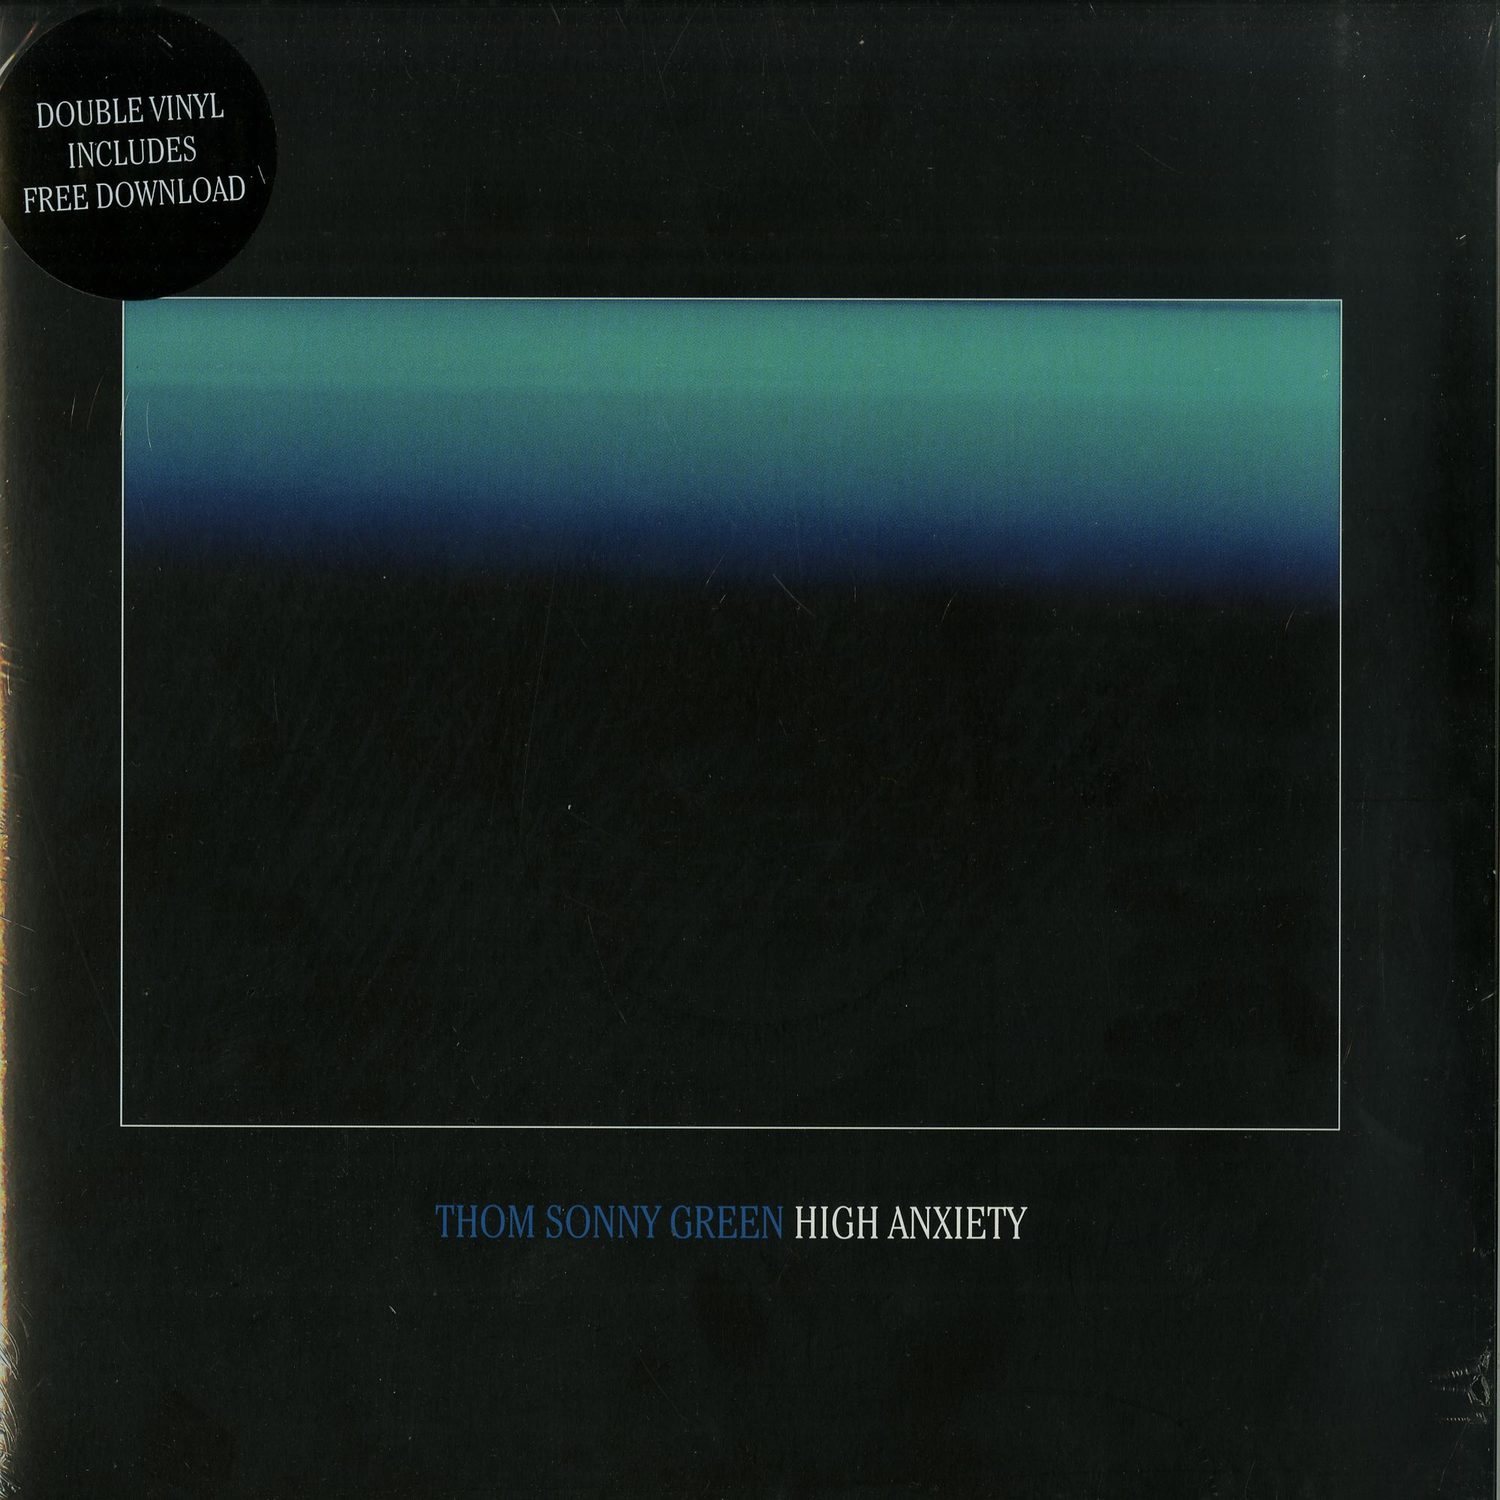 Thom Sonny Green - HIGH ANXIETY 